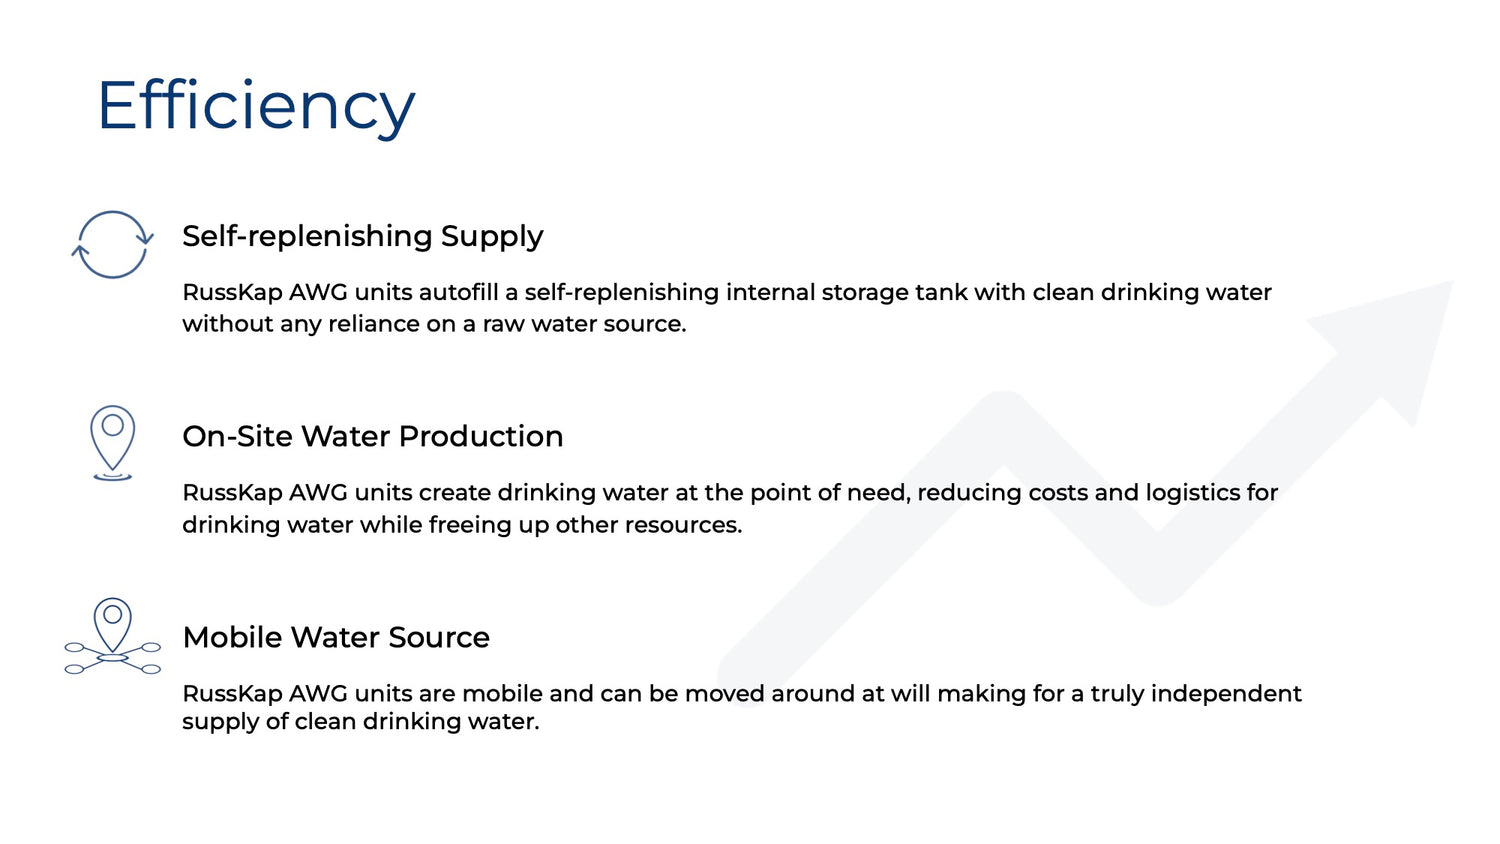 RussKap AWG Efficiency: self-replenishing supply, on-site water production, mobile water source.